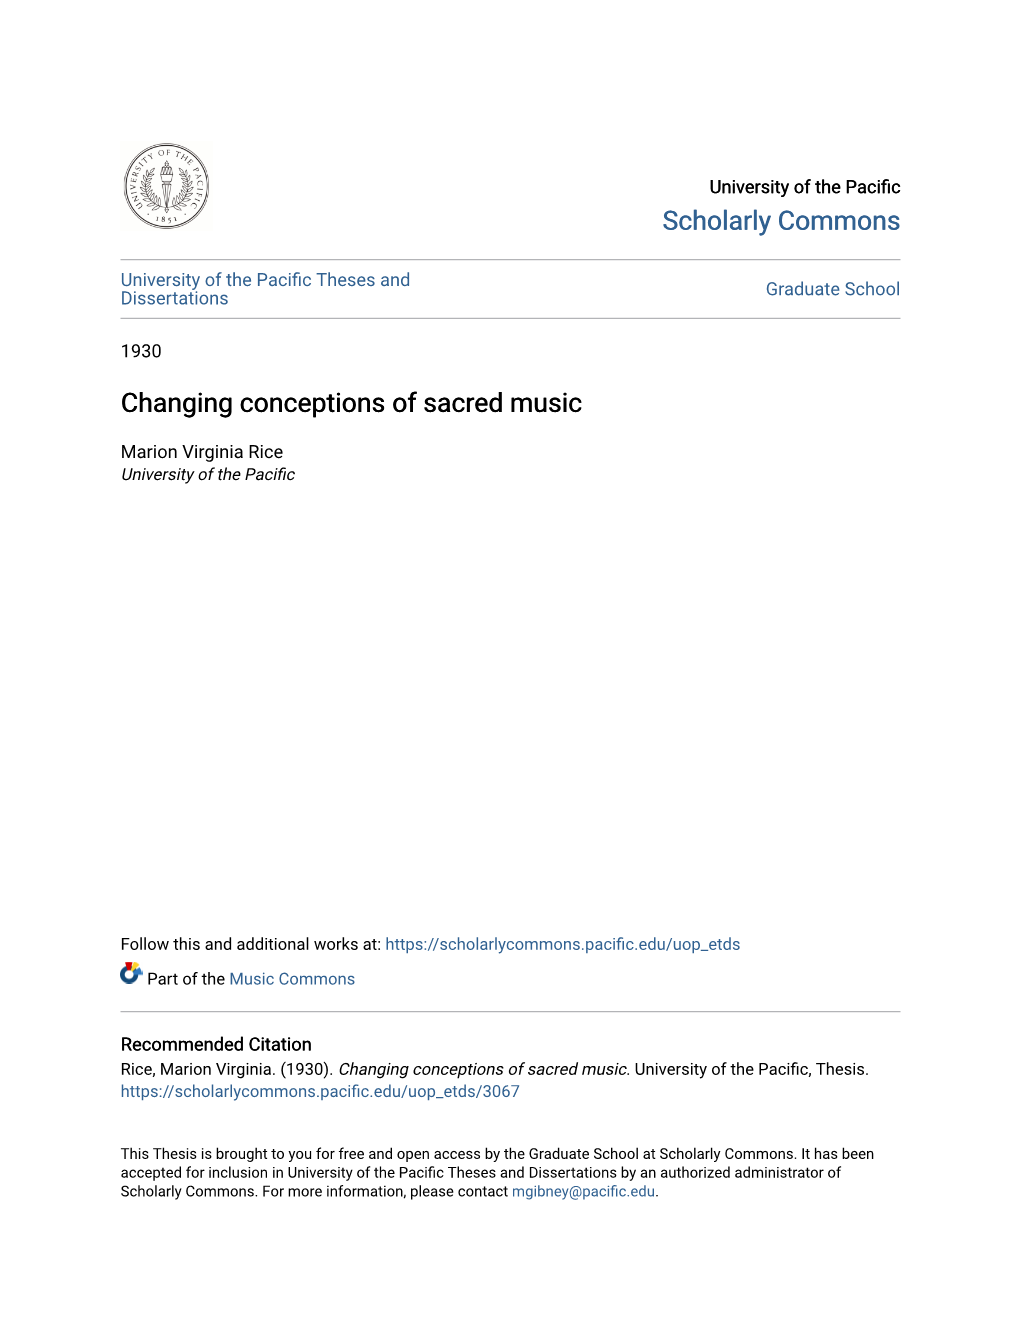 Changing Conceptions of Sacred Music